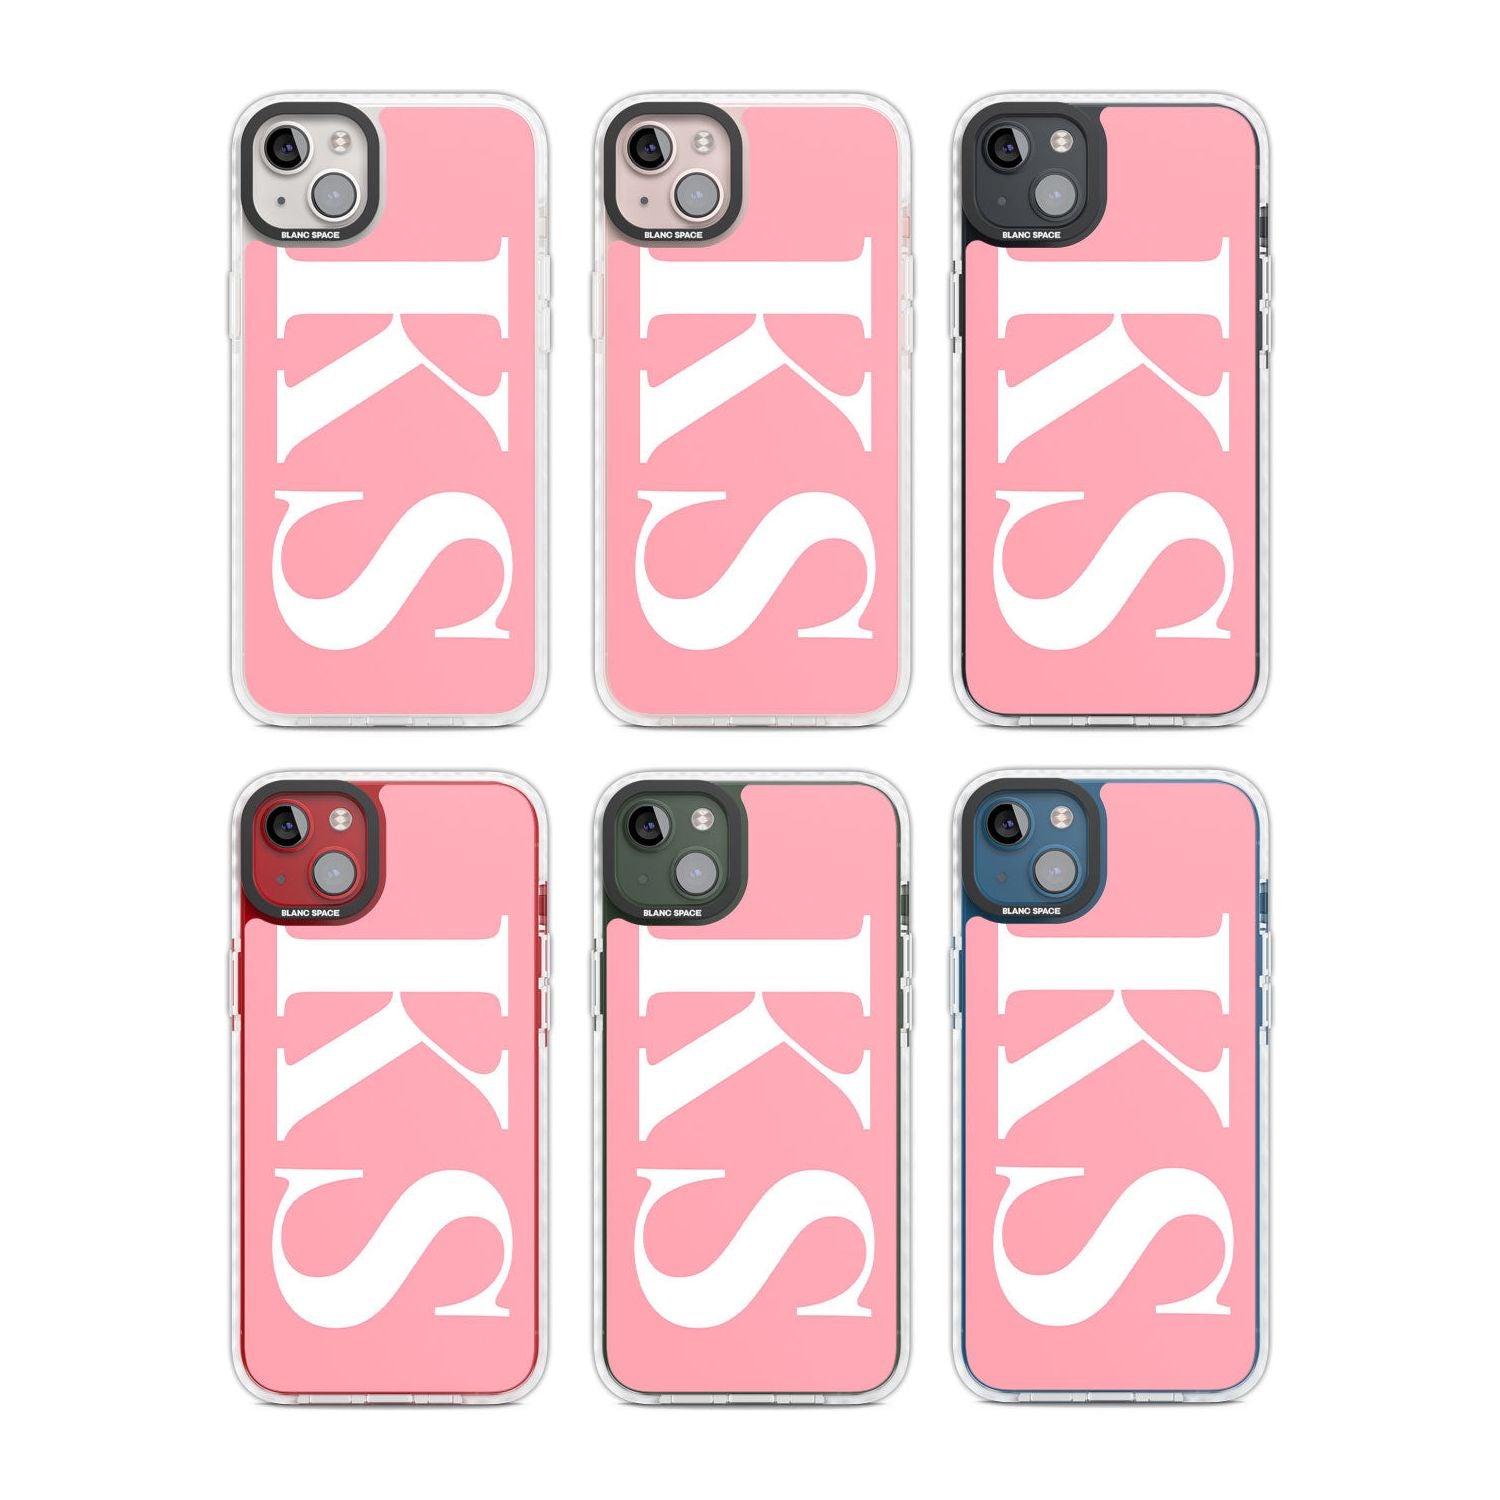 Personalised White & Pink Letters Custom Phone Case iPhone 15 Pro Max / Black Impact Case,iPhone 15 Plus / Black Impact Case,iPhone 15 Pro / Black Impact Case,iPhone 15 / Black Impact Case,iPhone 15 Pro Max / Impact Case,iPhone 15 Plus / Impact Case,iPhone 15 Pro / Impact Case,iPhone 15 / Impact Case,iPhone 15 Pro Max / Magsafe Black Impact Case,iPhone 15 Plus / Magsafe Black Impact Case,iPhone 15 Pro / Magsafe Black Impact Case,iPhone 15 / Magsafe Black Impact Case,iPhone 14 Pro Max / Black Impact Case,iPh